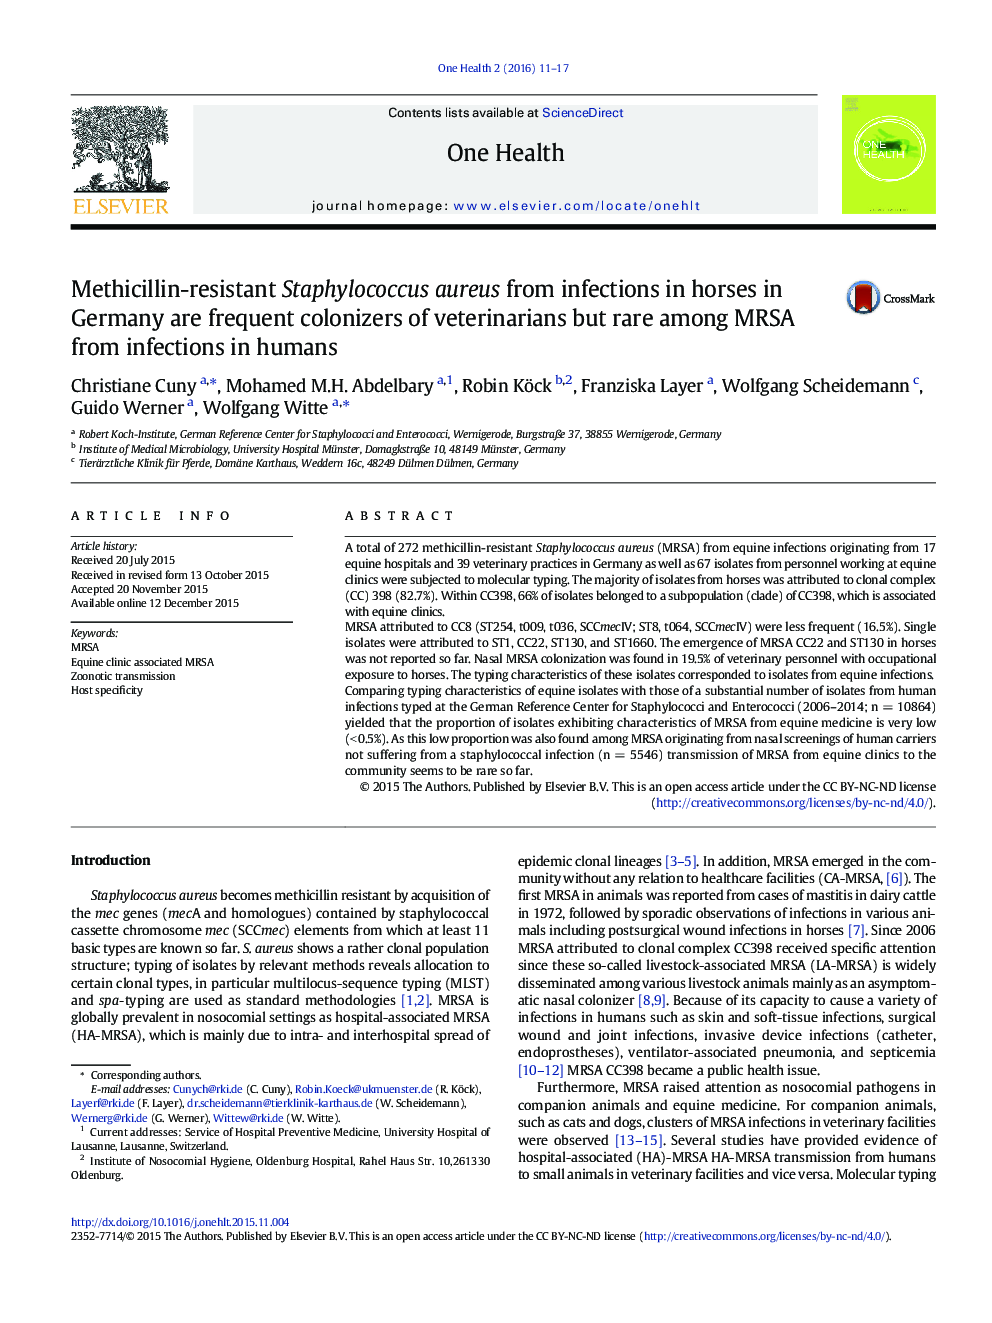 Methicillin-resistant Staphylococcus aureus from infections in horses in Germany are frequent colonizers of veterinarians but rare among MRSA from infections in humans